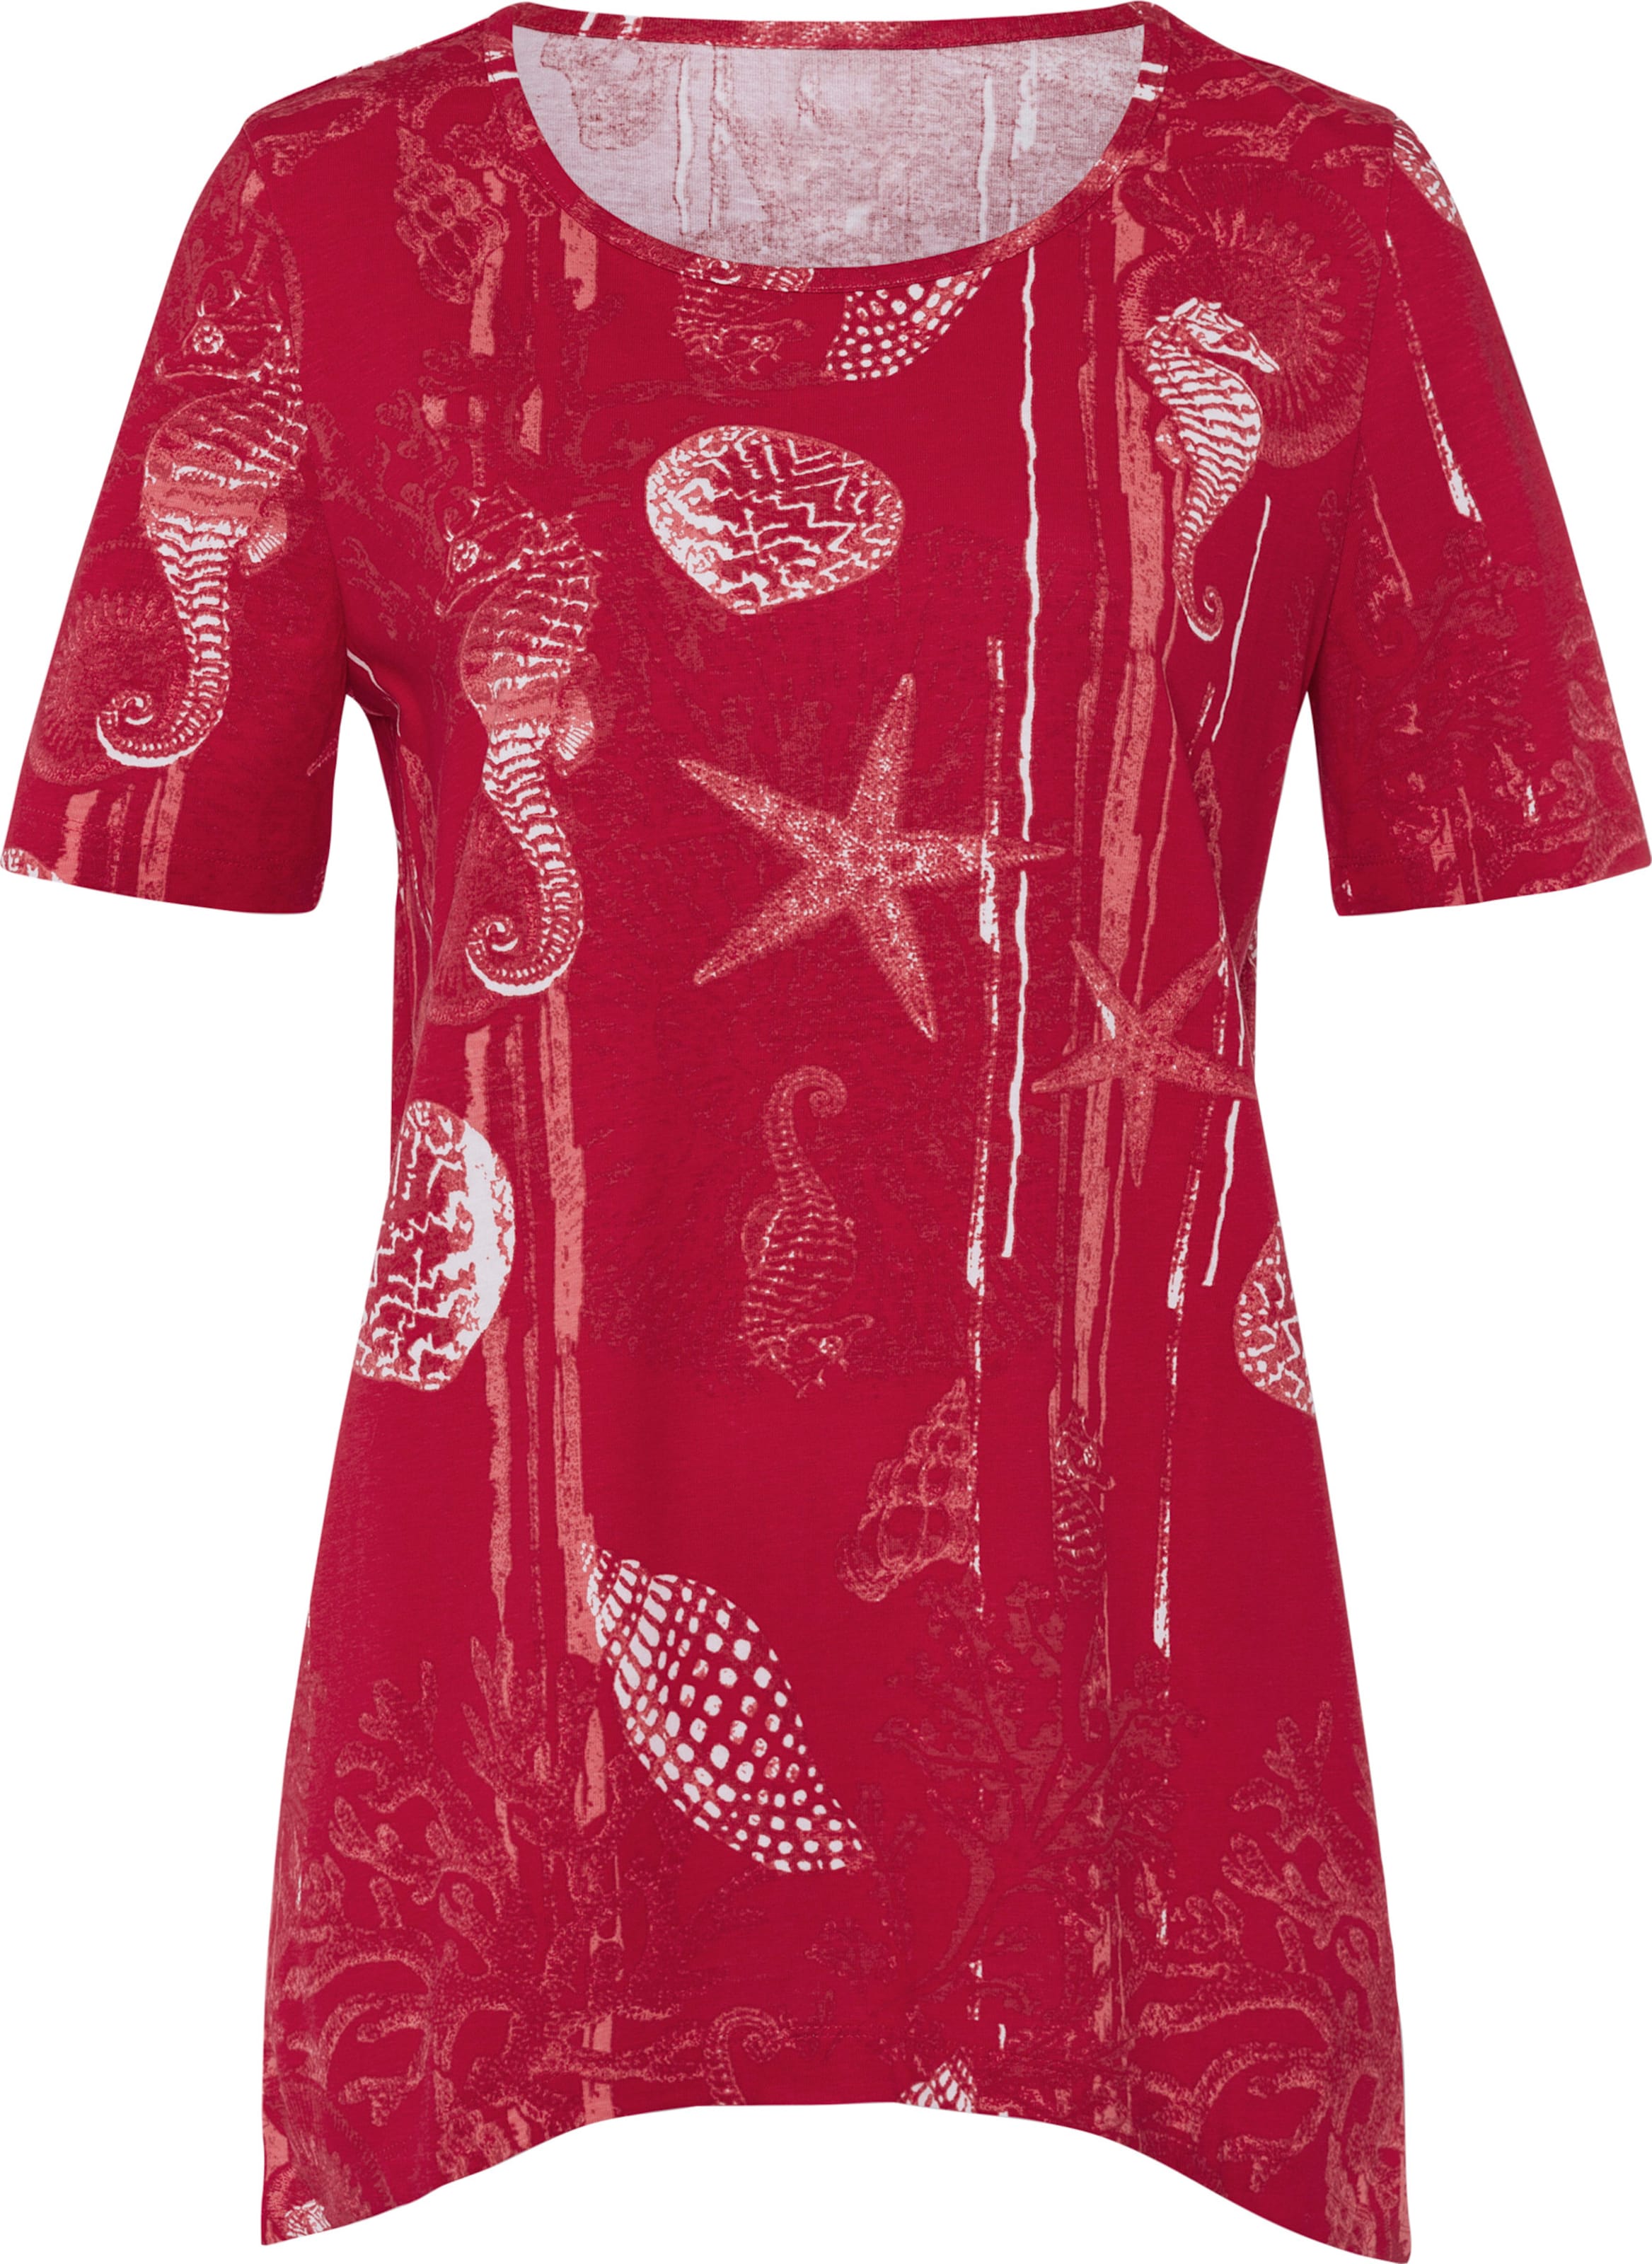 Your Look... for less! Dames Puntig shirt rood/wit geprint Größe